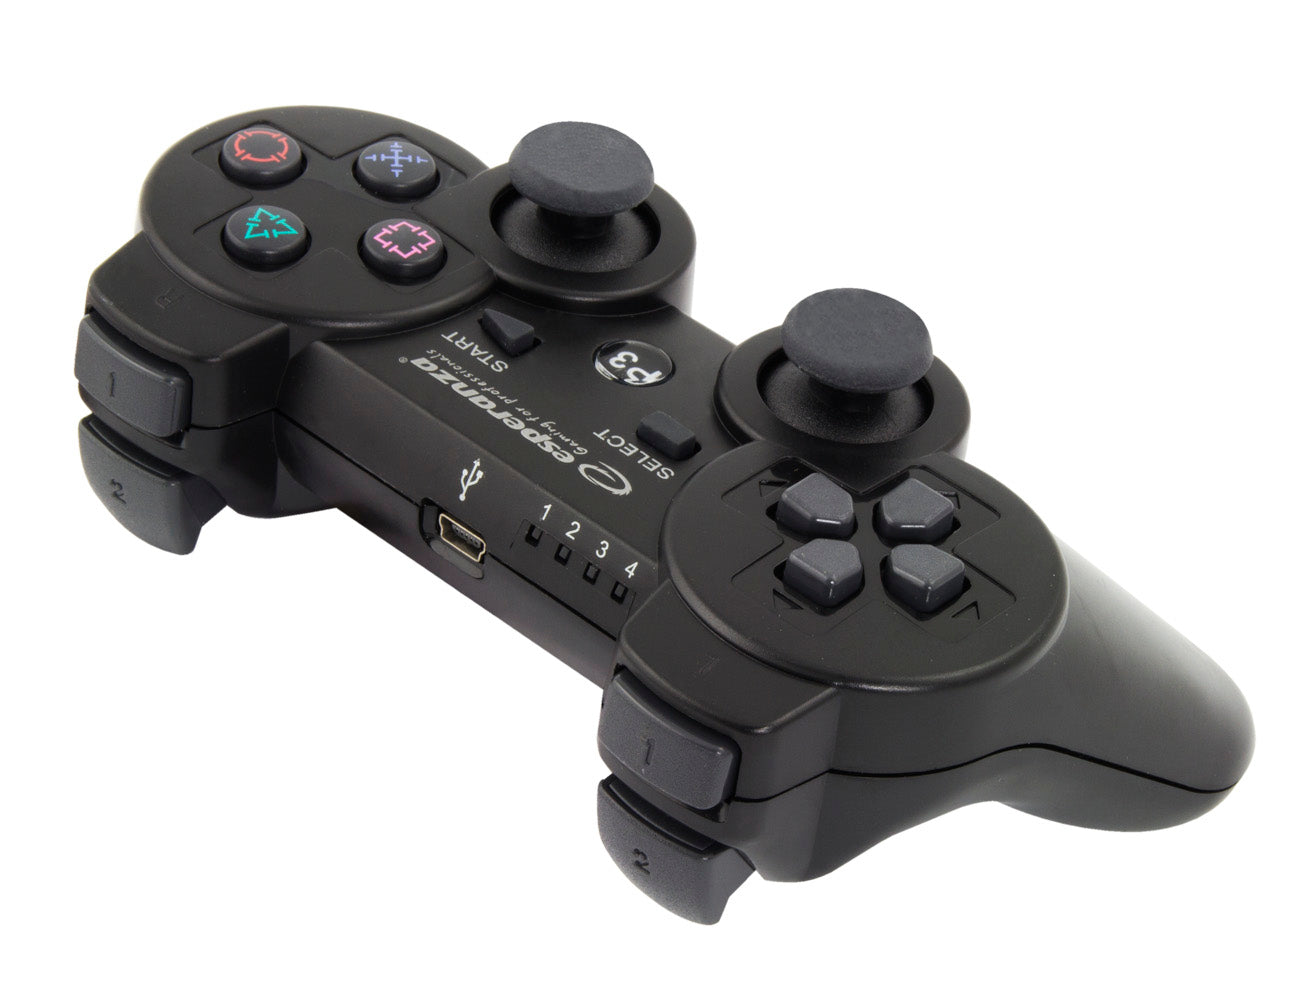 Bluetooth Gamepad Controller Joystick Joypad with Vibration Wireless Wireless for PS3 Playstation 3